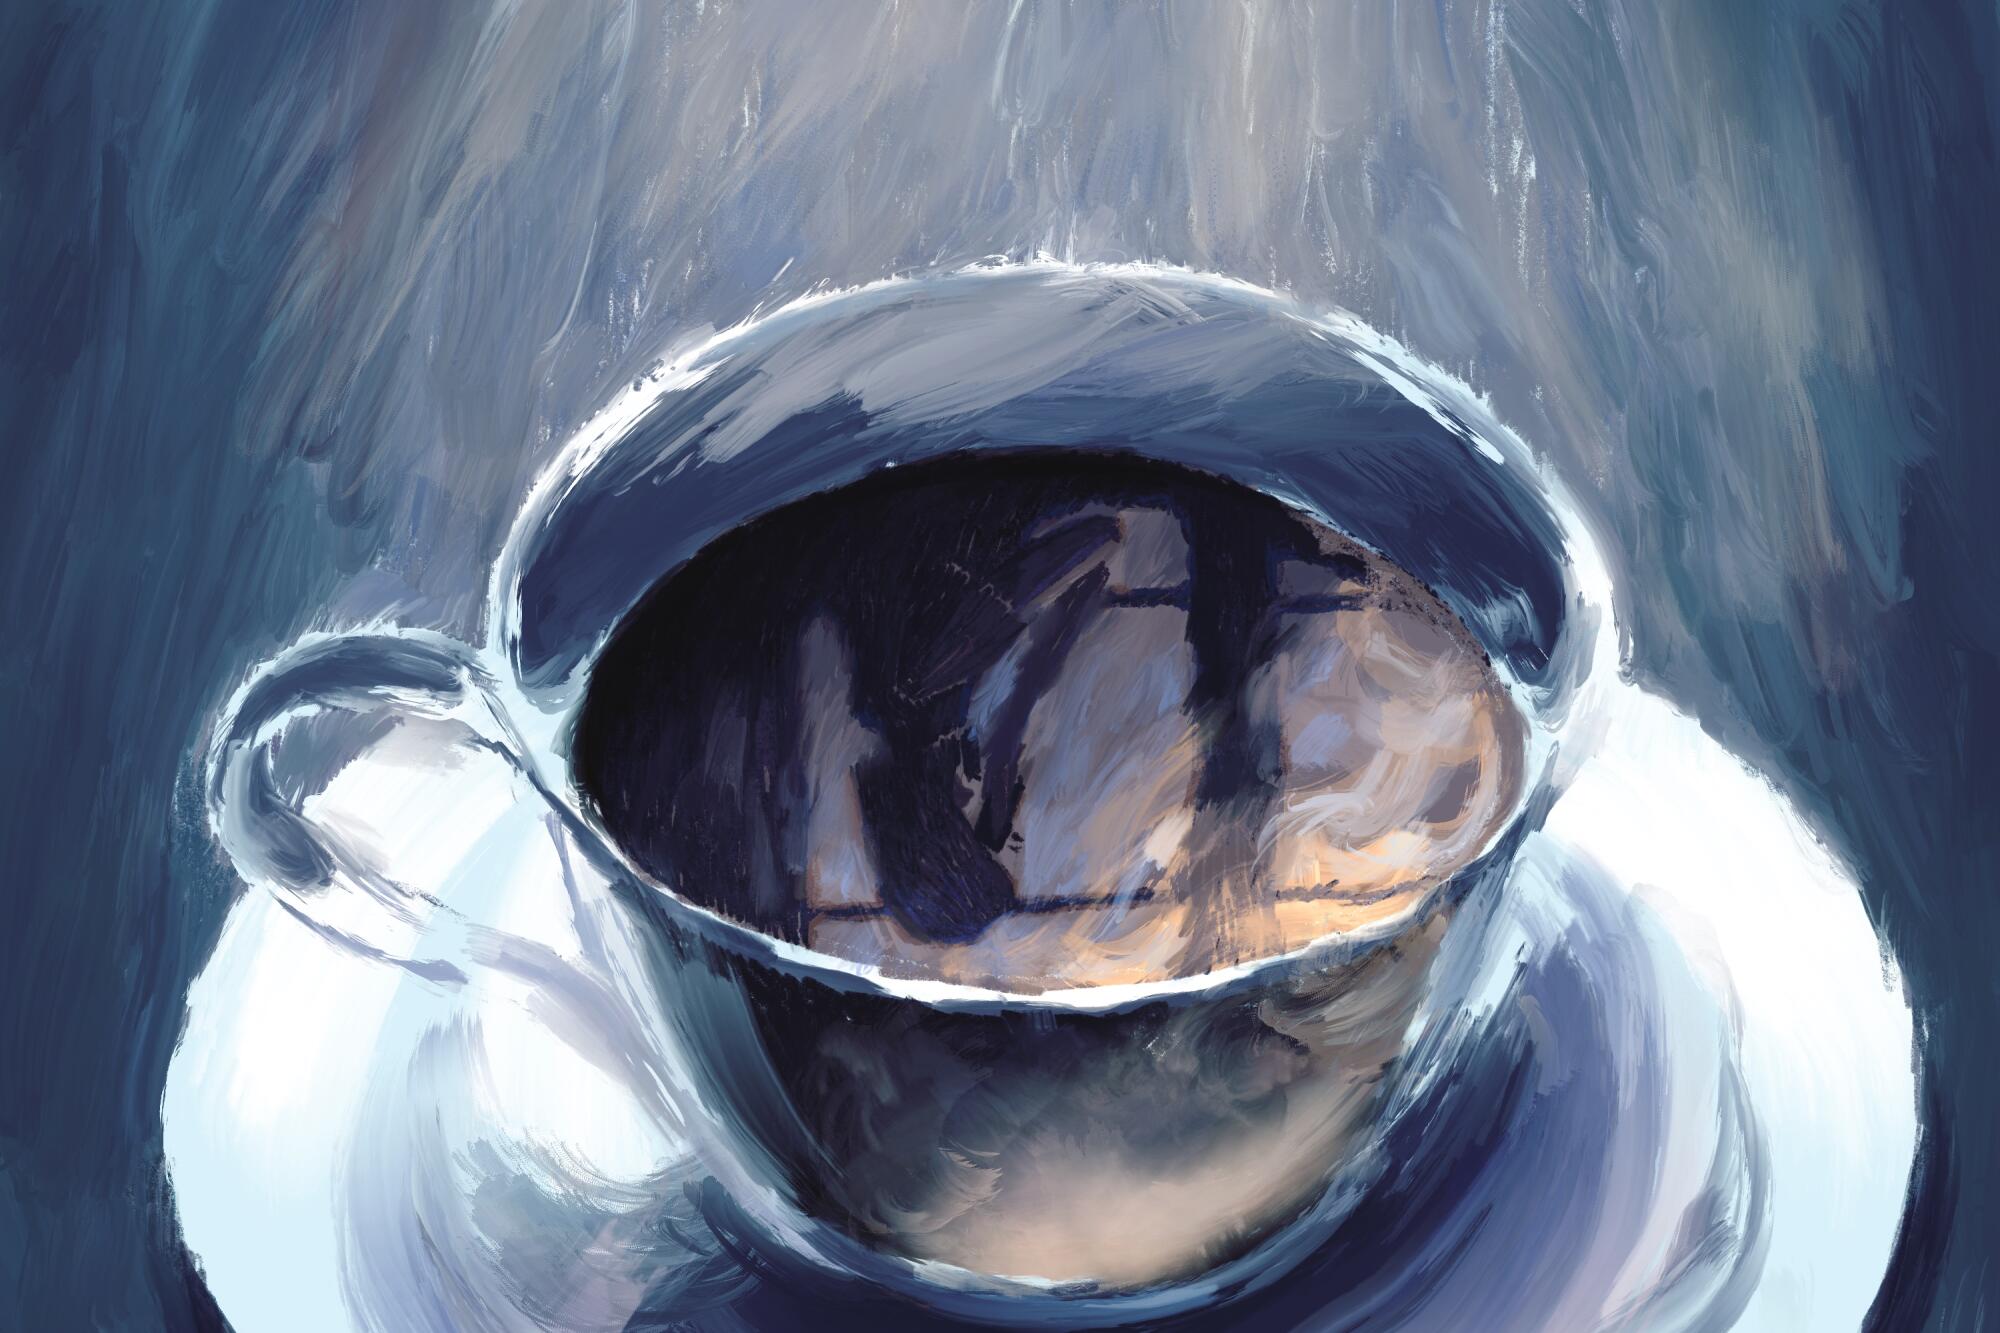 Close up illustration of a teacup that shows the reflection of a woman on the phone looking out the window.